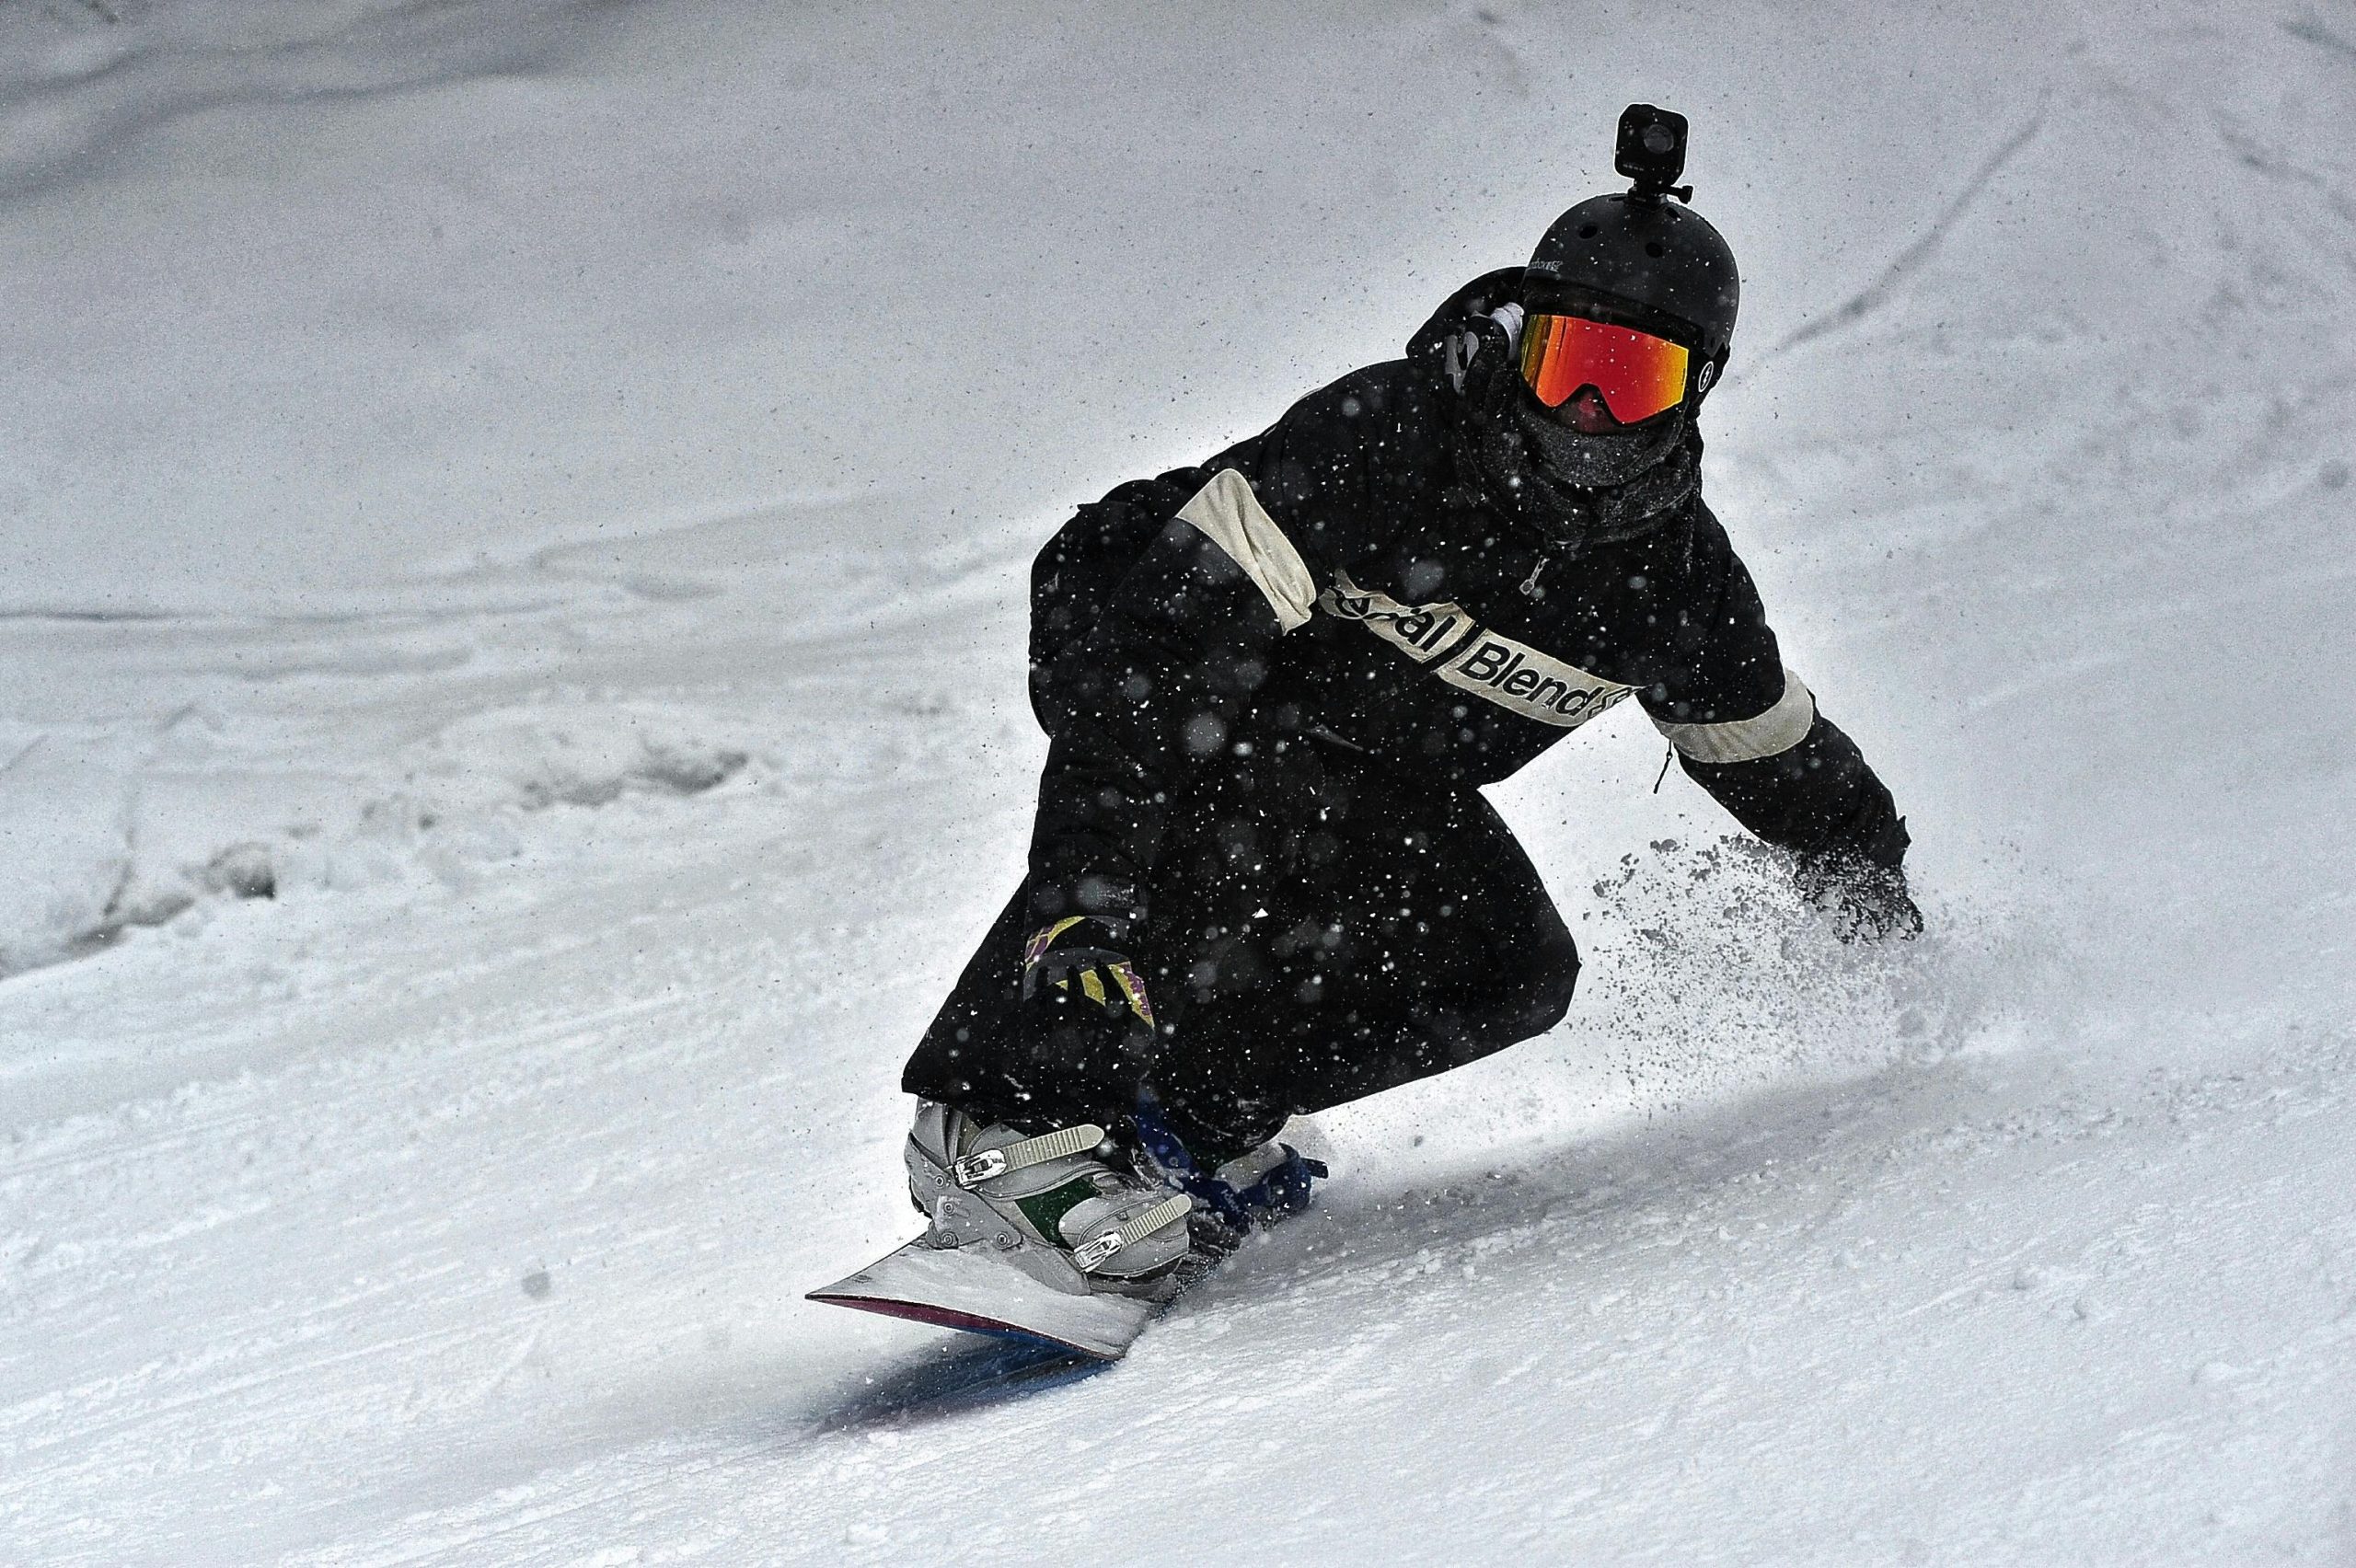 Opinion: Why Skiing is Safer Than Snowboarding